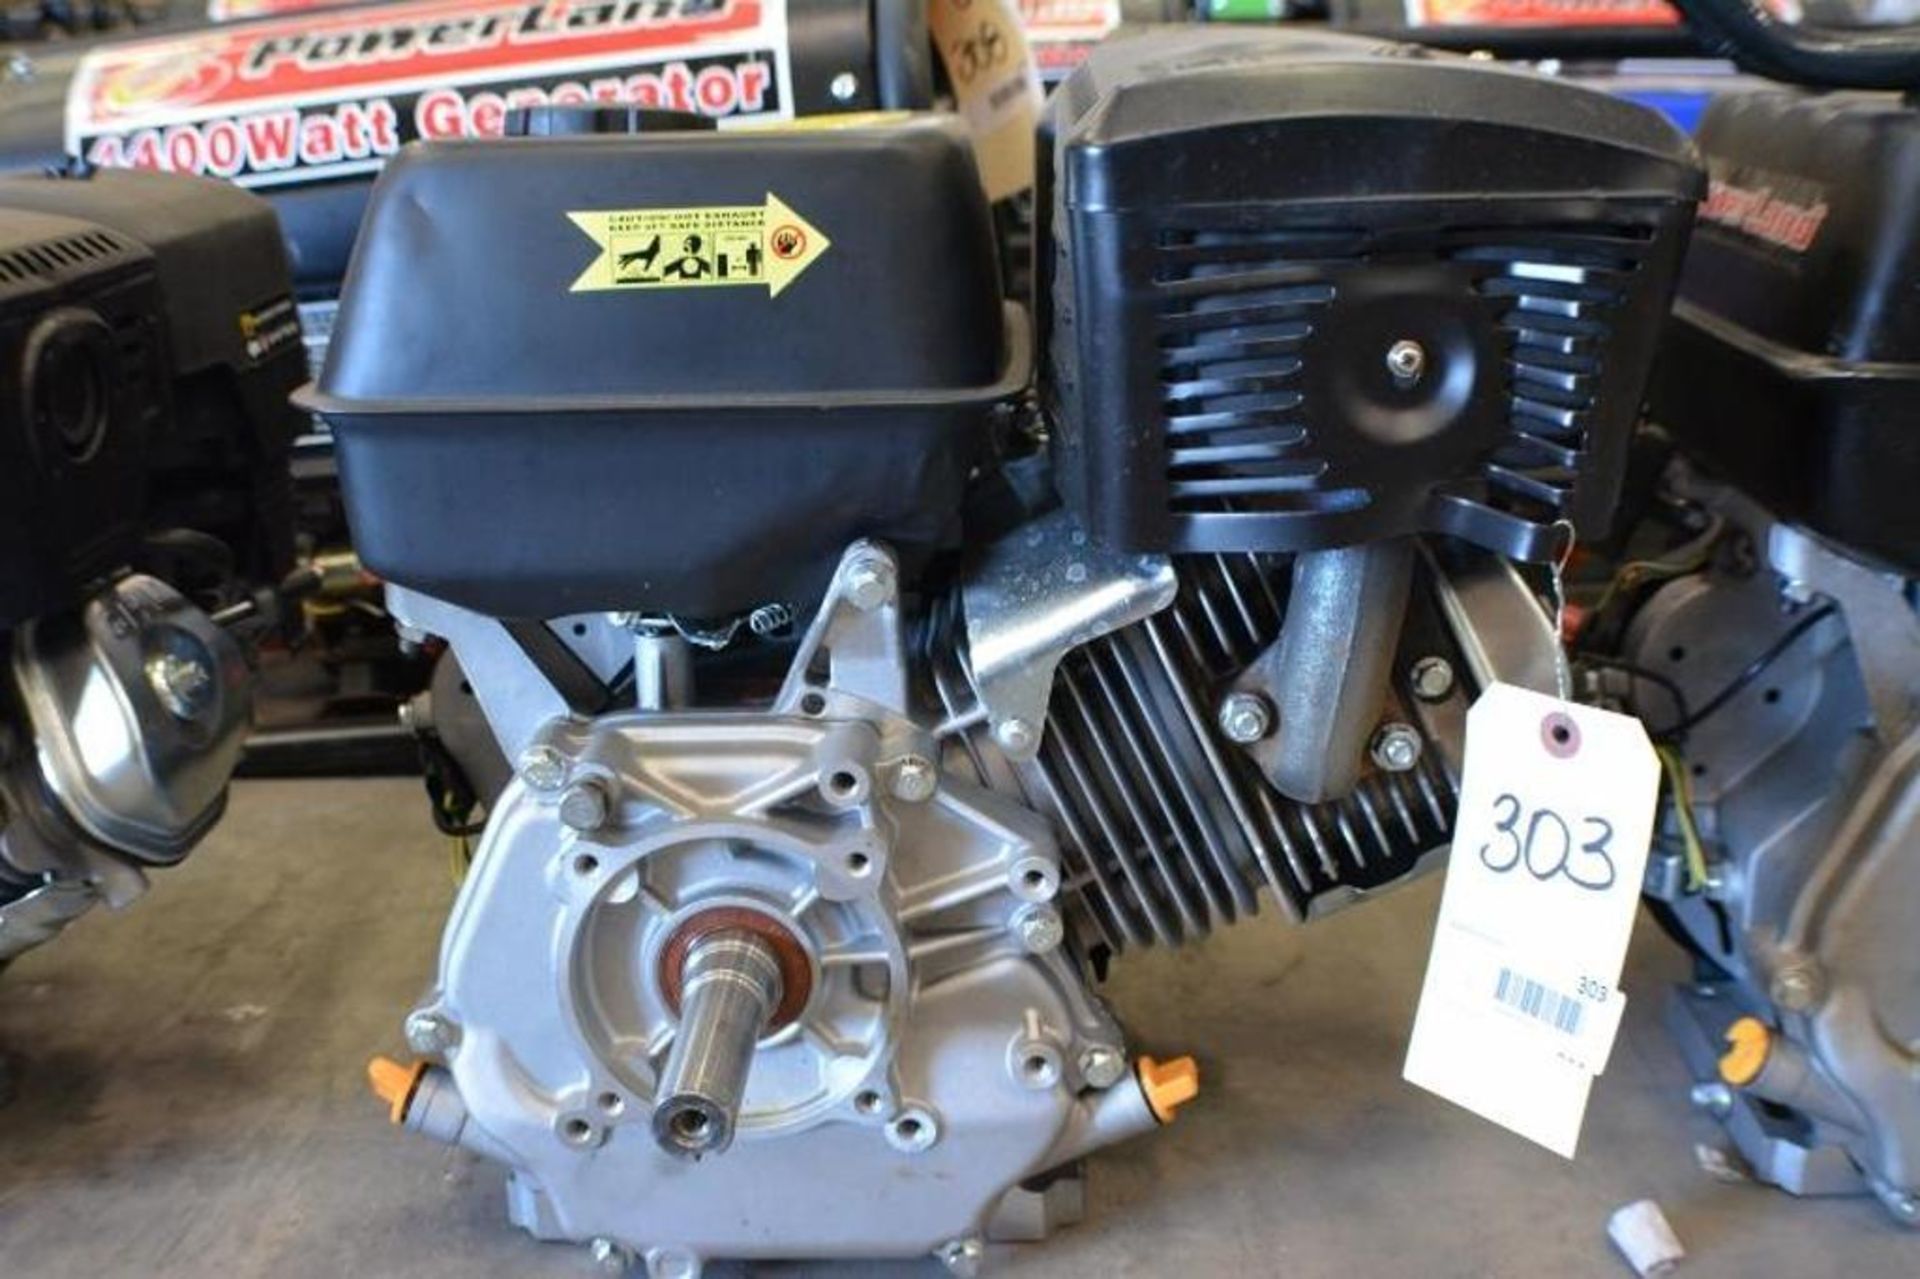 16.0 HP Gasoline Engine 4 Stroke by Powerland Model PD420 - Image 2 of 5